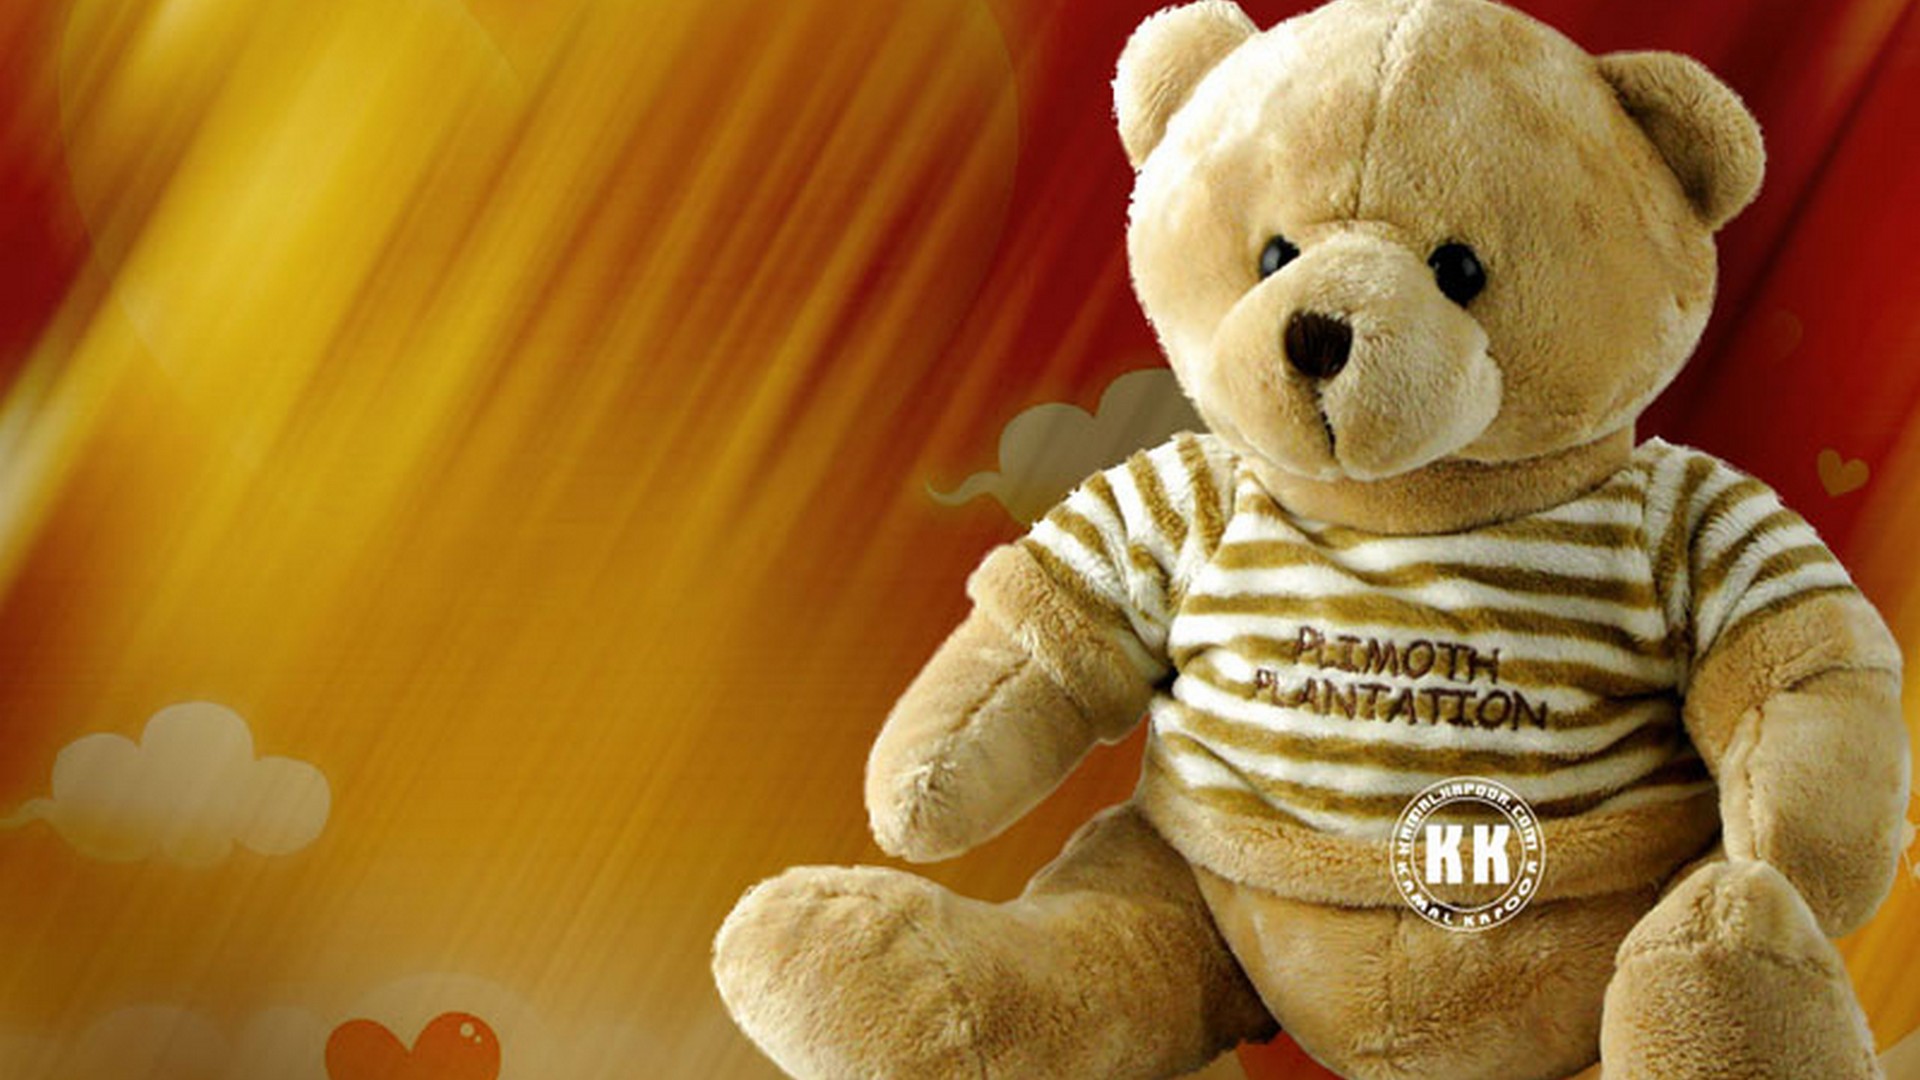 Teddy Bear Giant Desktop Backgrounds HD with image resolution 1920x1080 pixel. You can use this wallpaper as background for your desktop Computer Screensavers, Android or iPhone smartphones